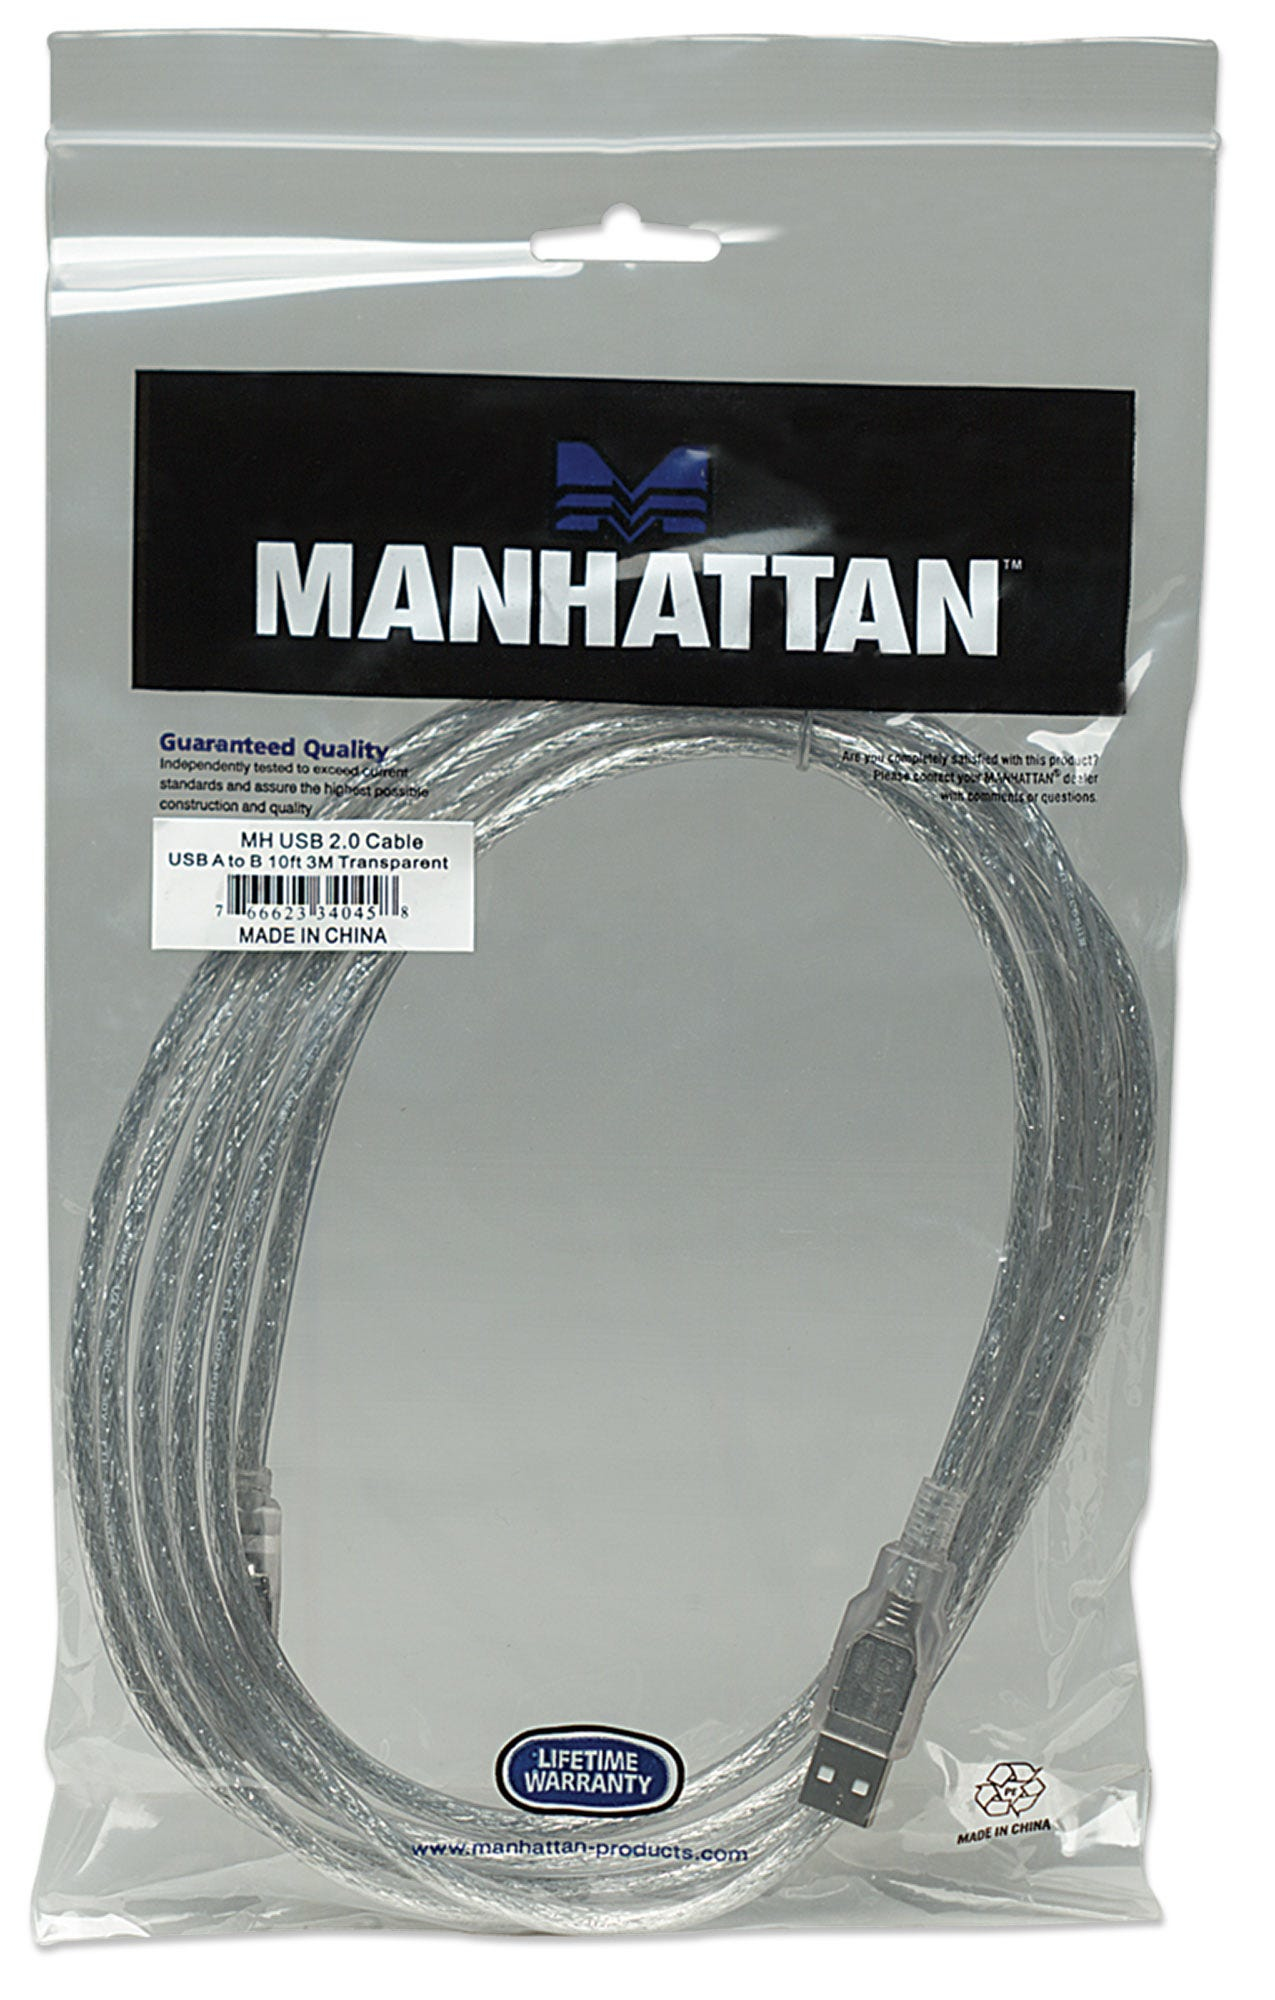 Manhattan USB-A to USB-B Cable, 3m, Male to Male, 480 Mbps (USB 2.0), Translucent Silver, Polybag